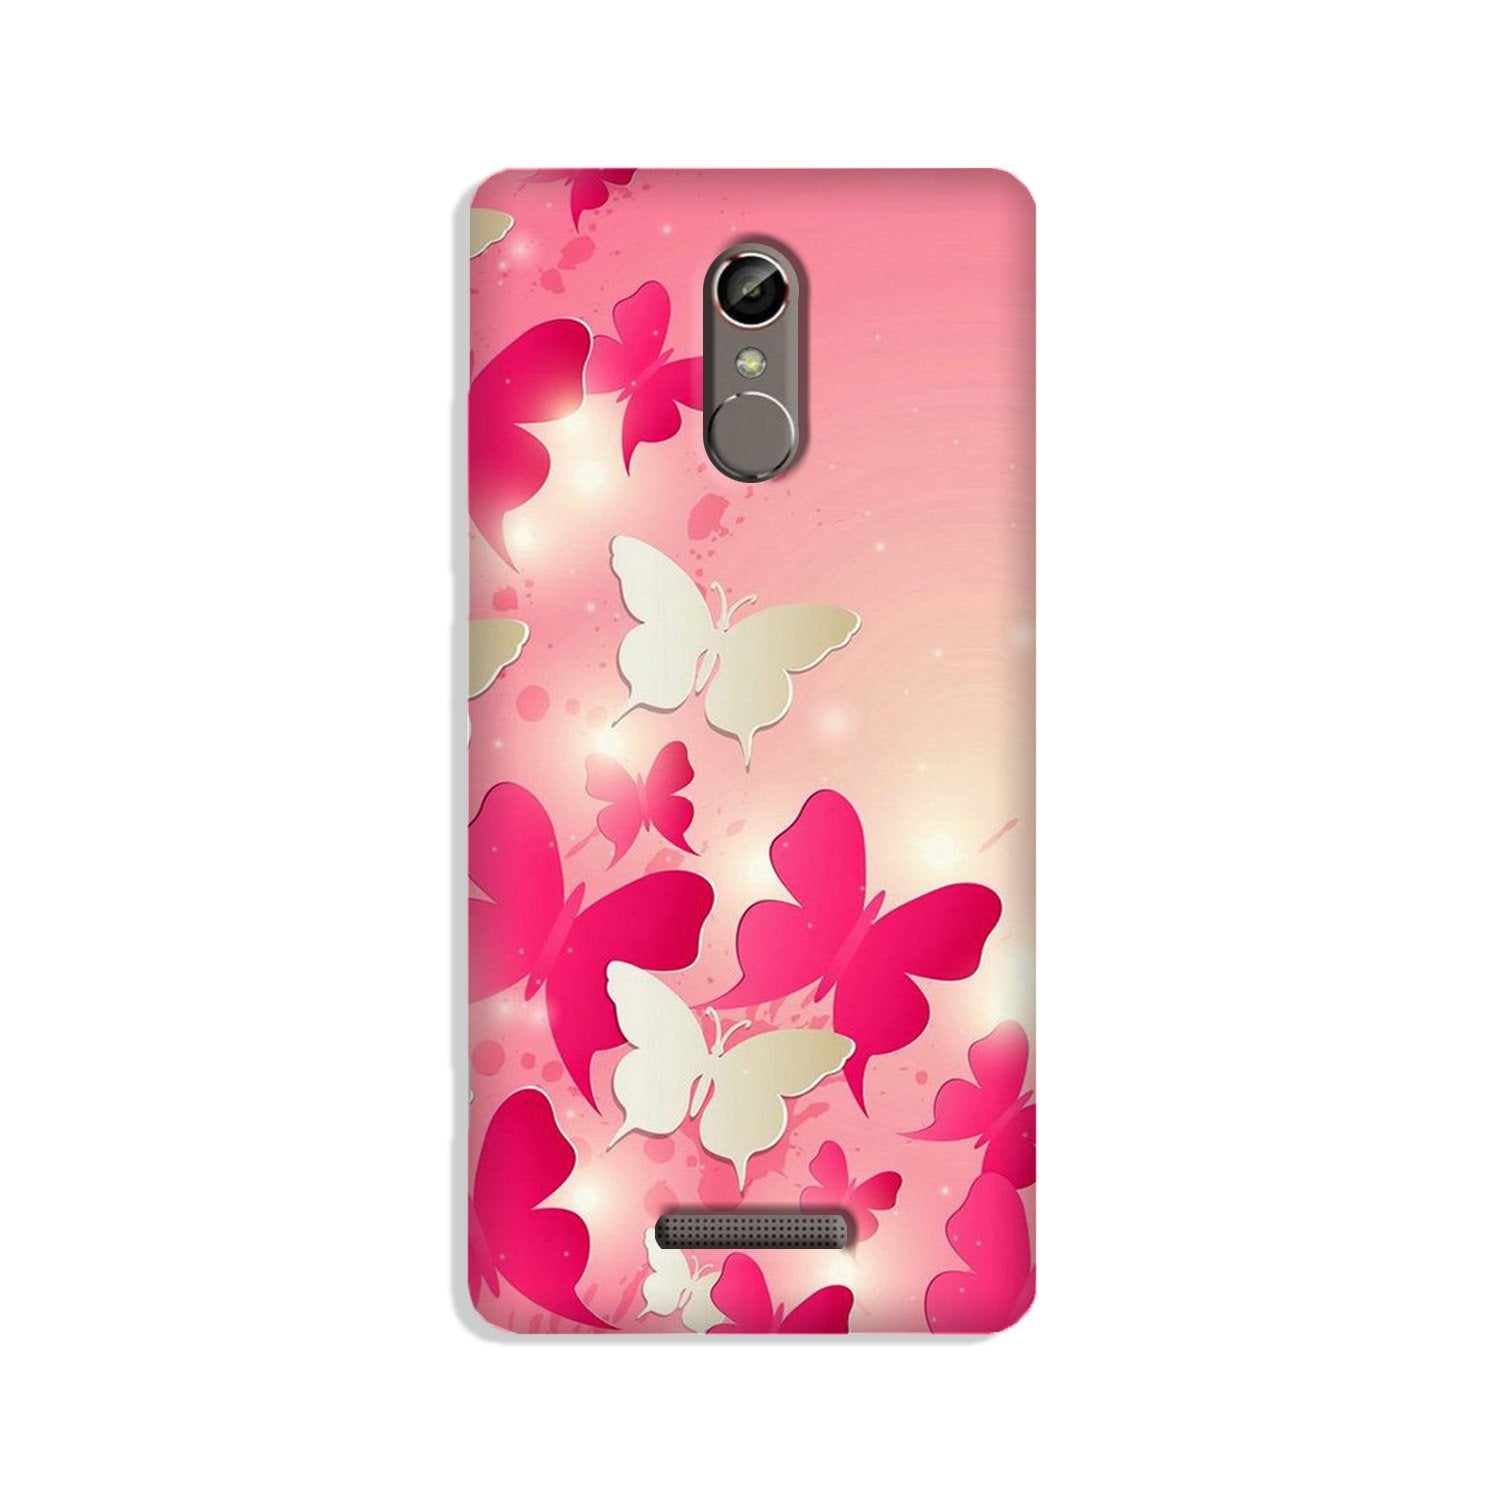 White Pick Butterflies Case for Gionee S6s